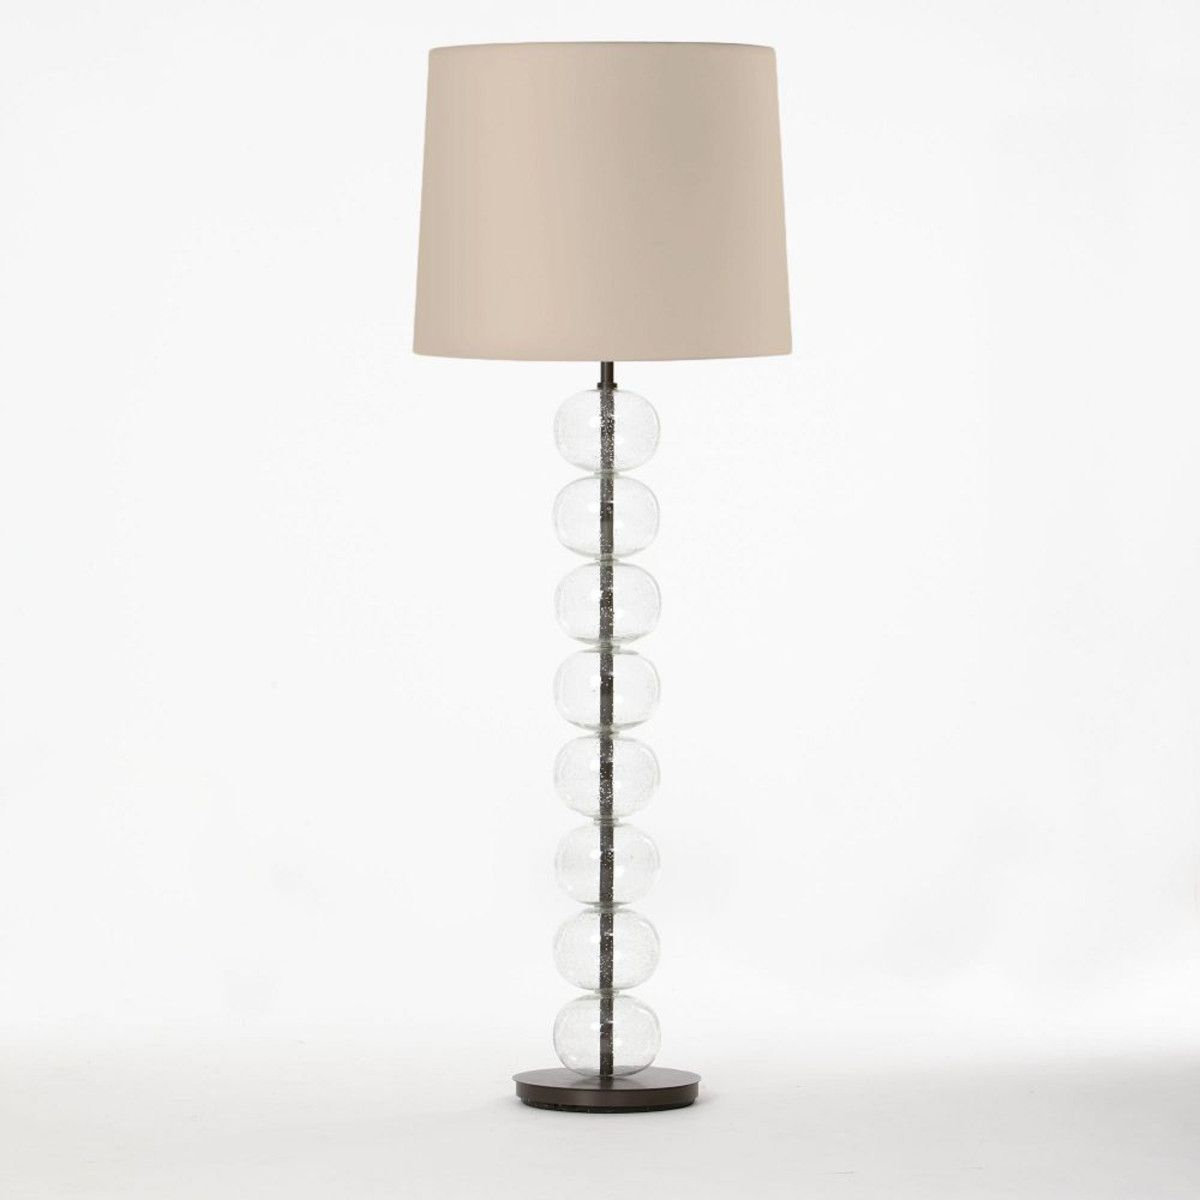 Abacus Floor Lamp West Elm Uk Floor Lamp Table Lamp within size 1200 X 1200